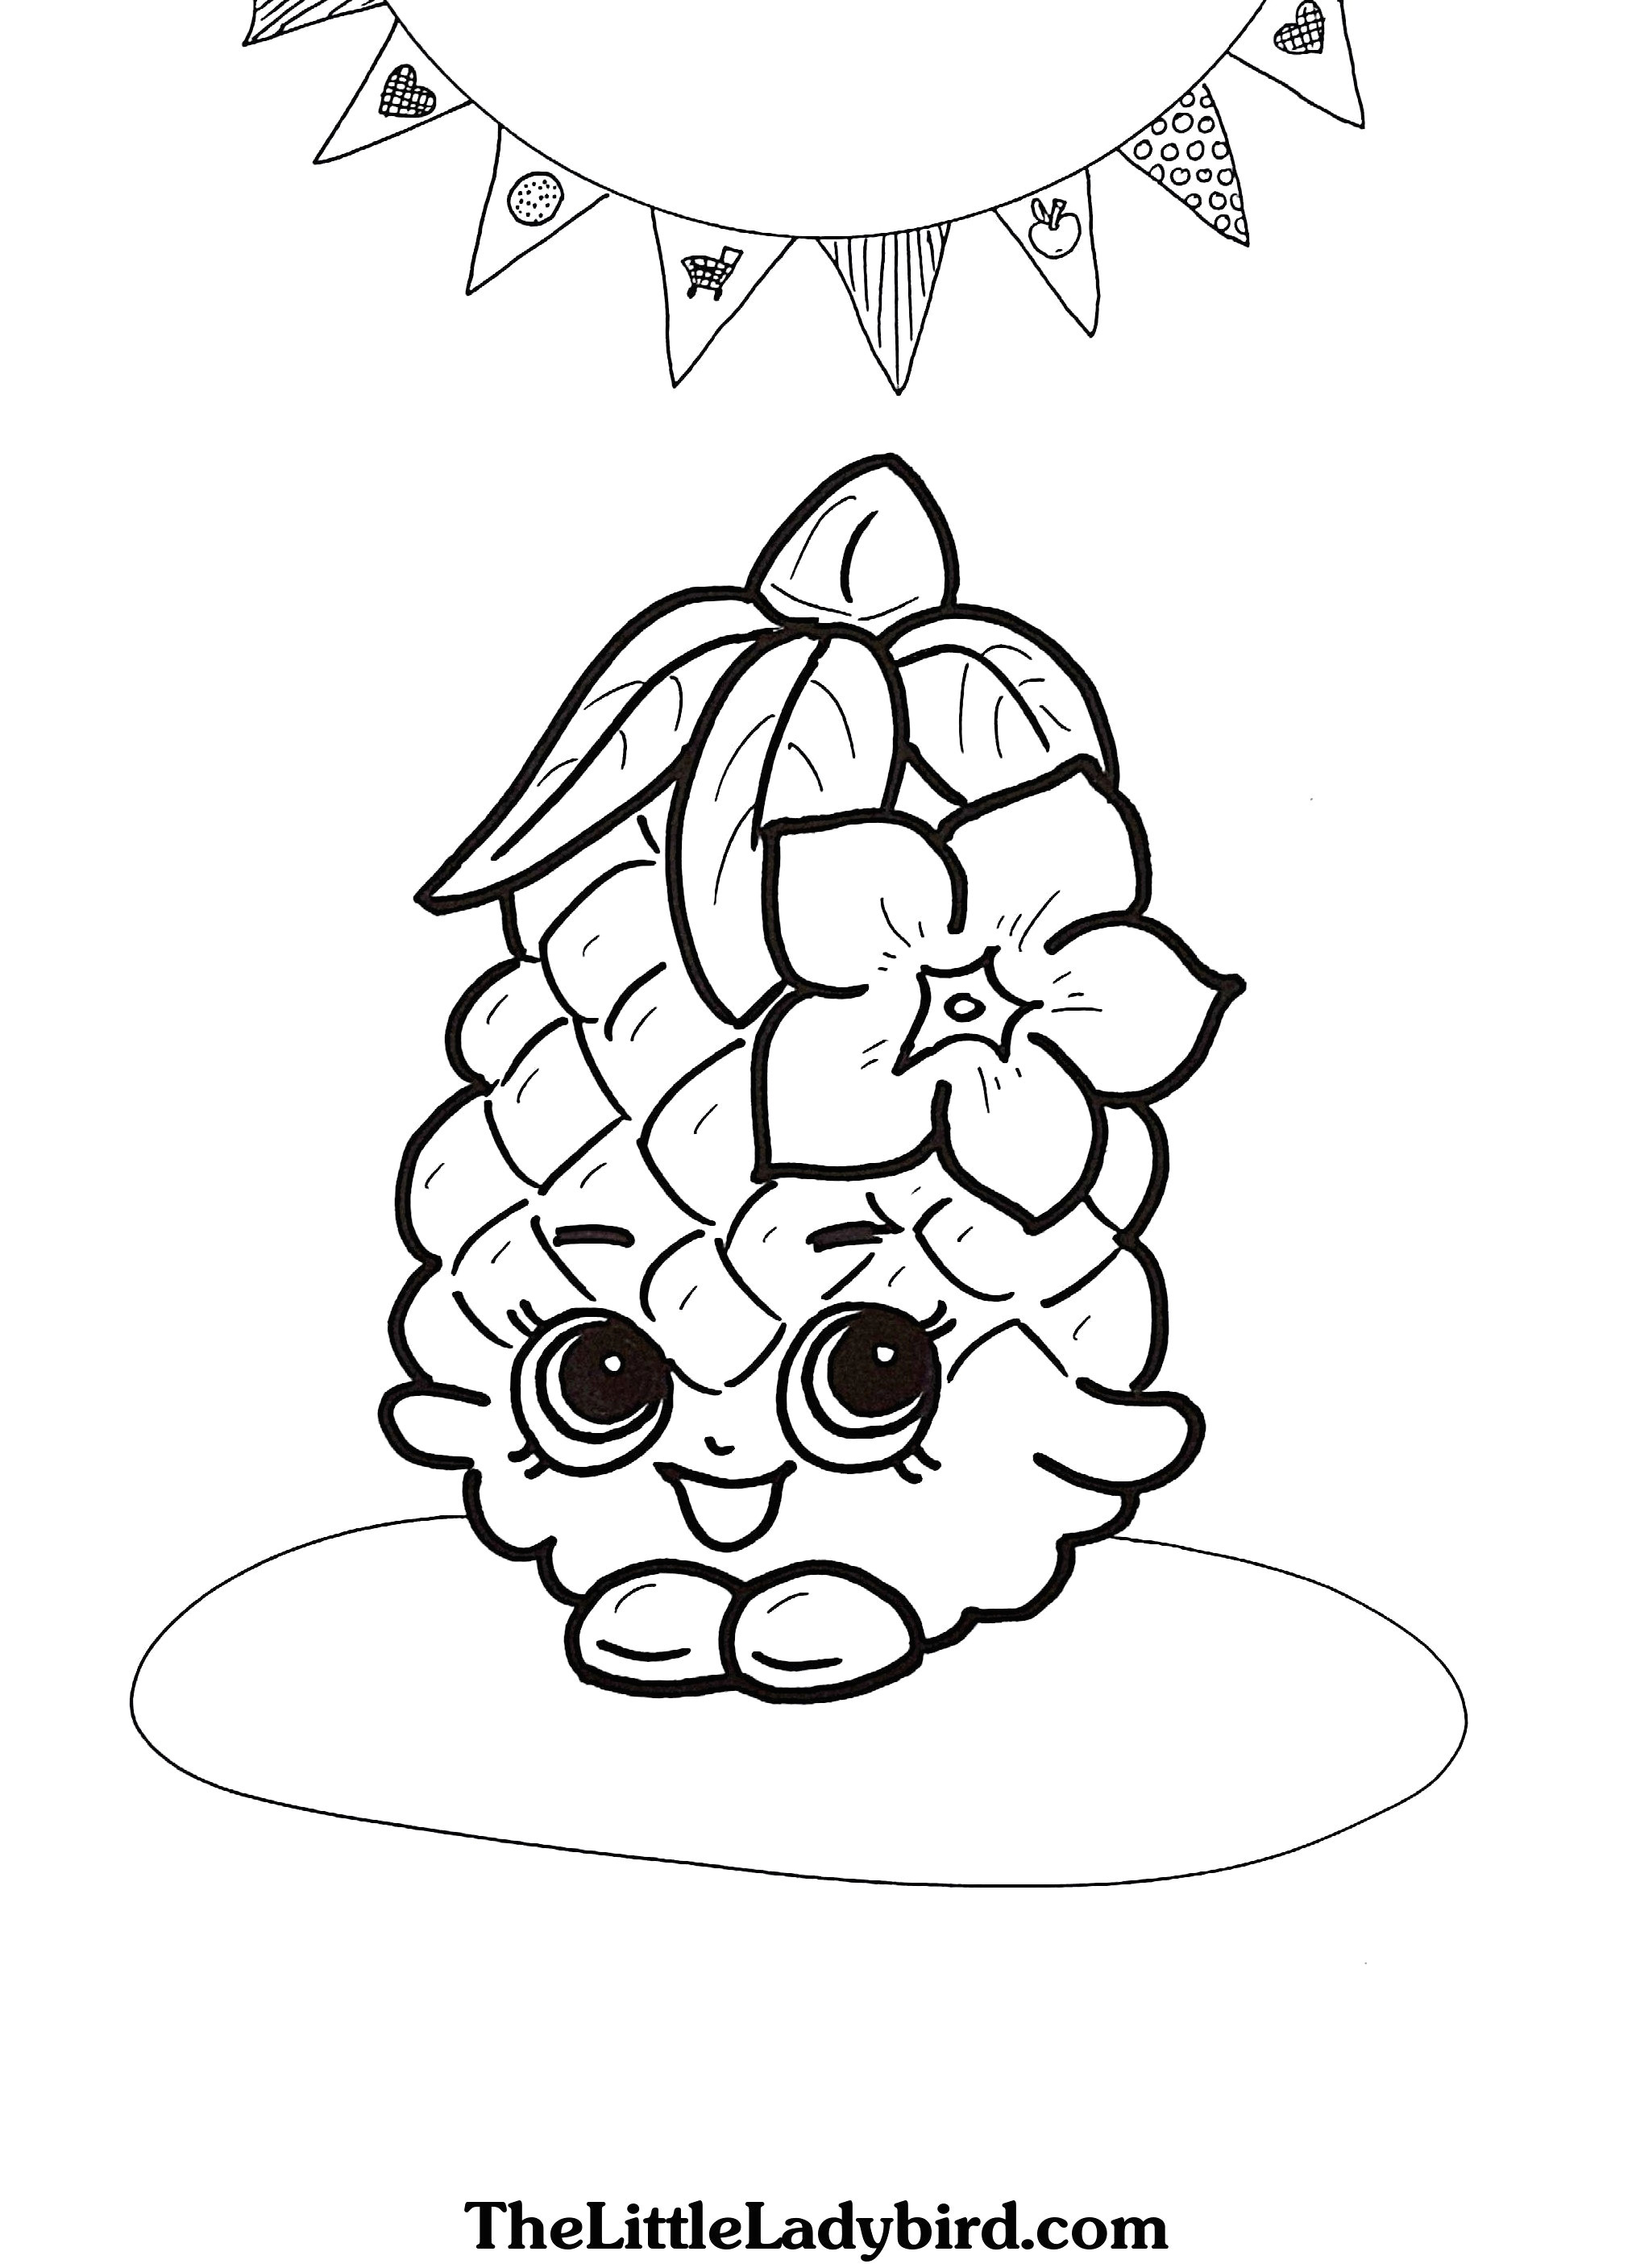 0d 71 fun coloring pages luxury s fun things to color inspirational cool coloring page unique